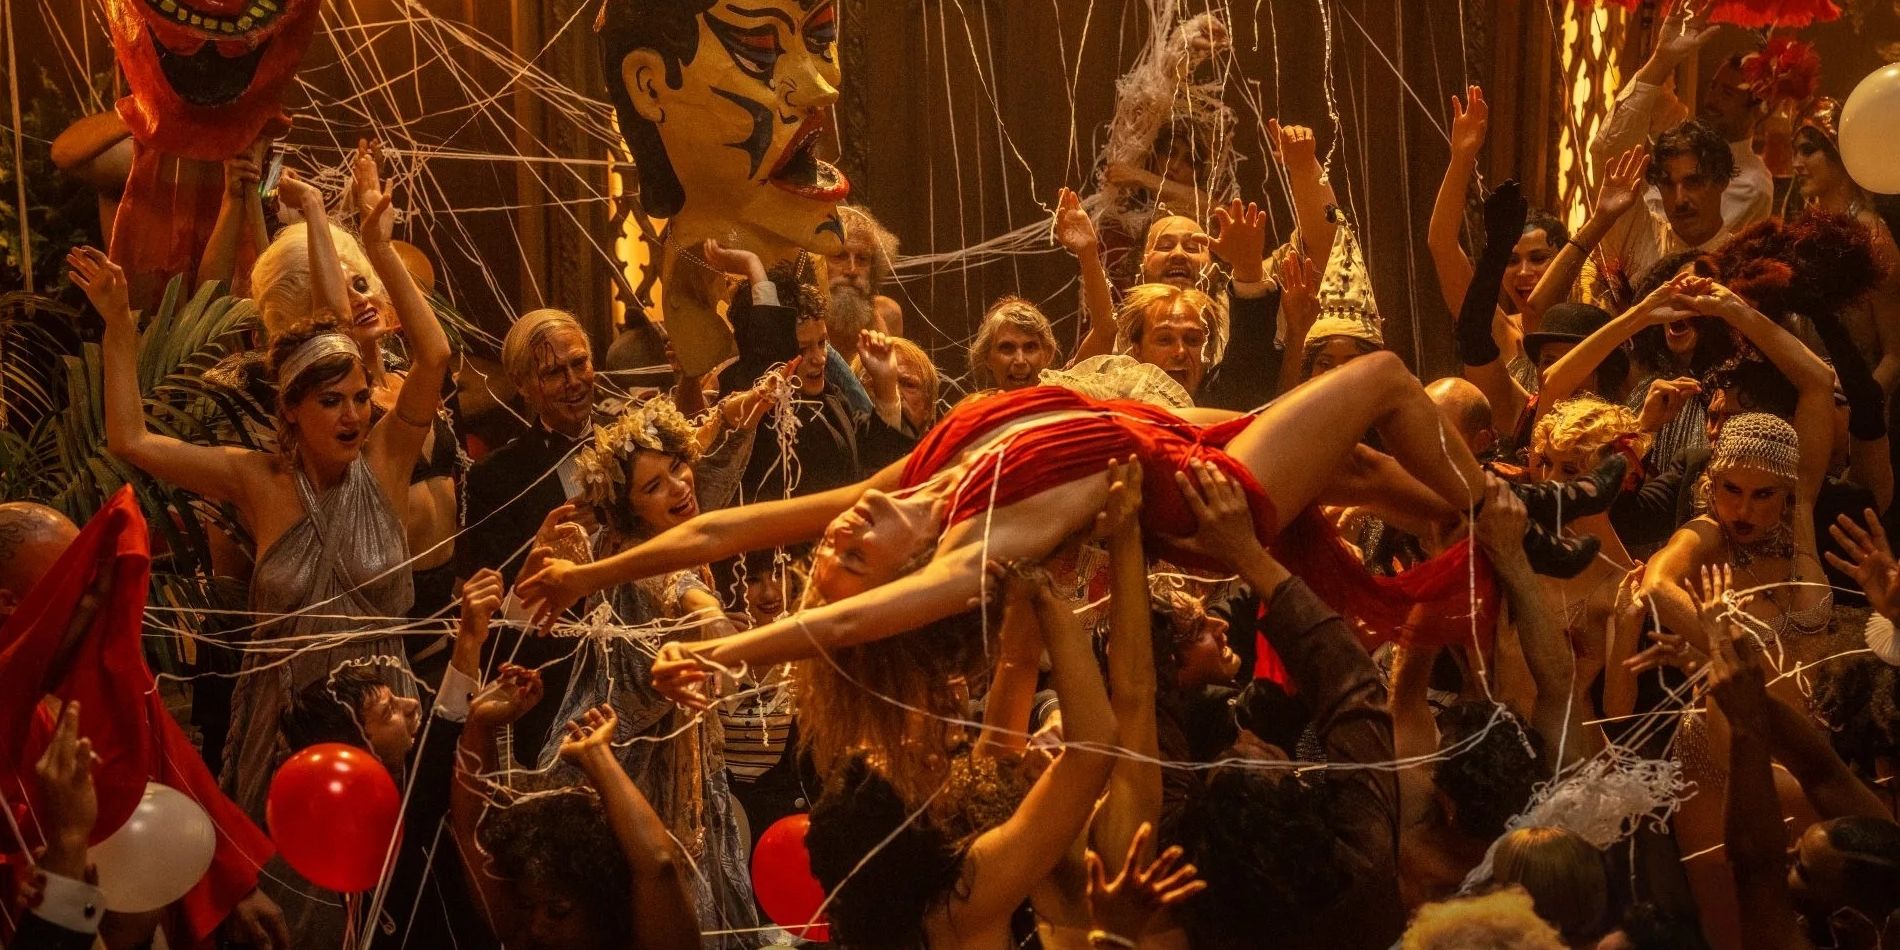 Margot Robbie as Nellie LaRoy in Babylon held above crowd at party